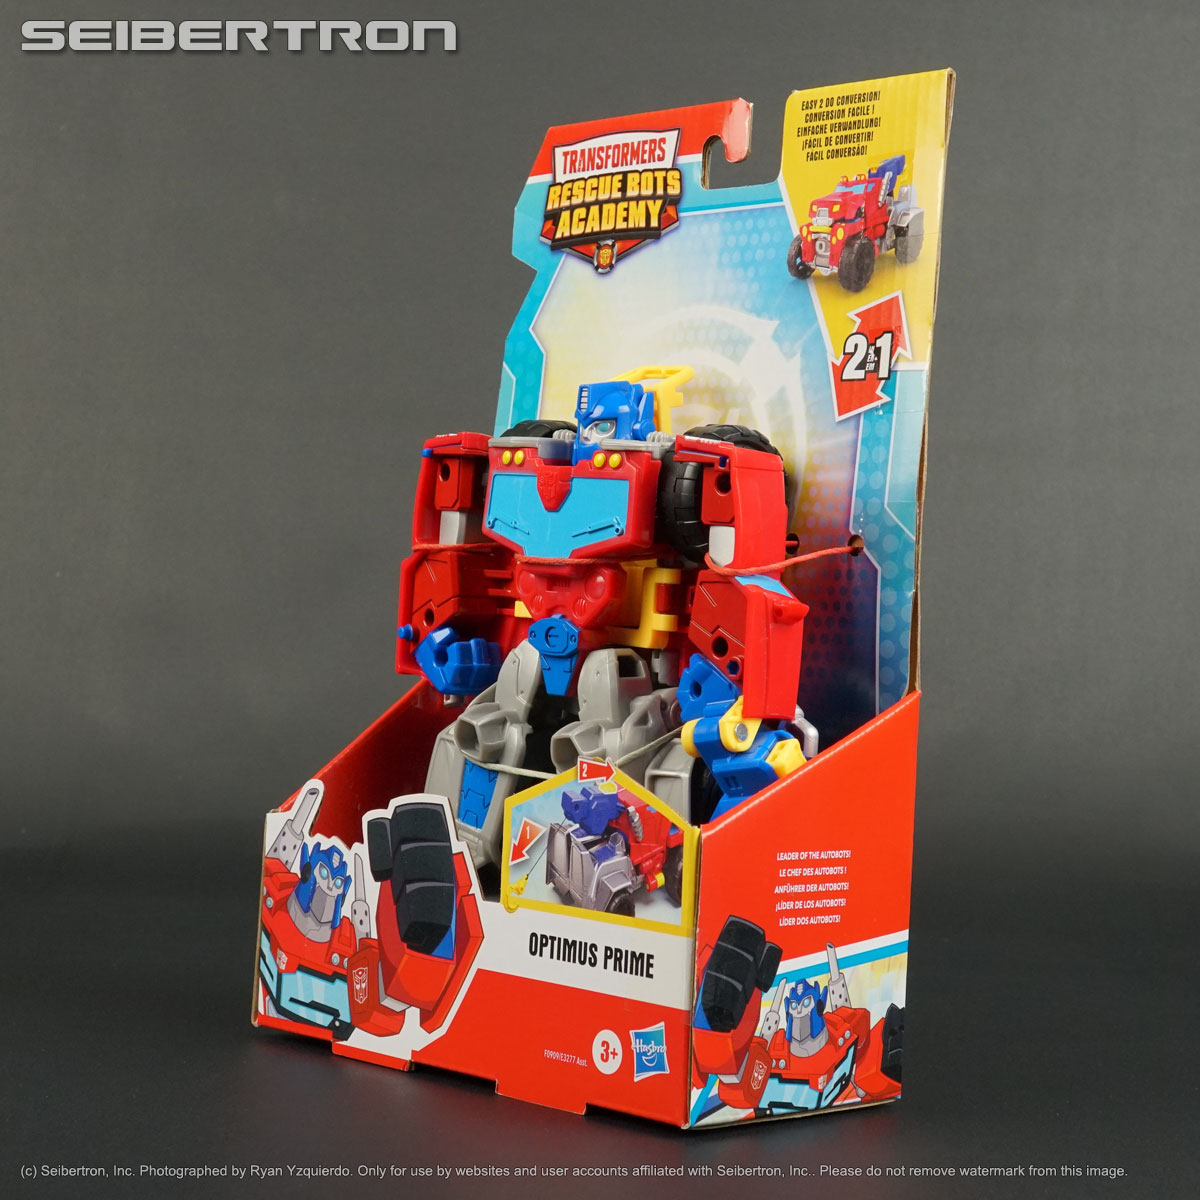 OPTIMUS PRIME Transformers Rescue Bots Academy Featured Feature Playskool 2022